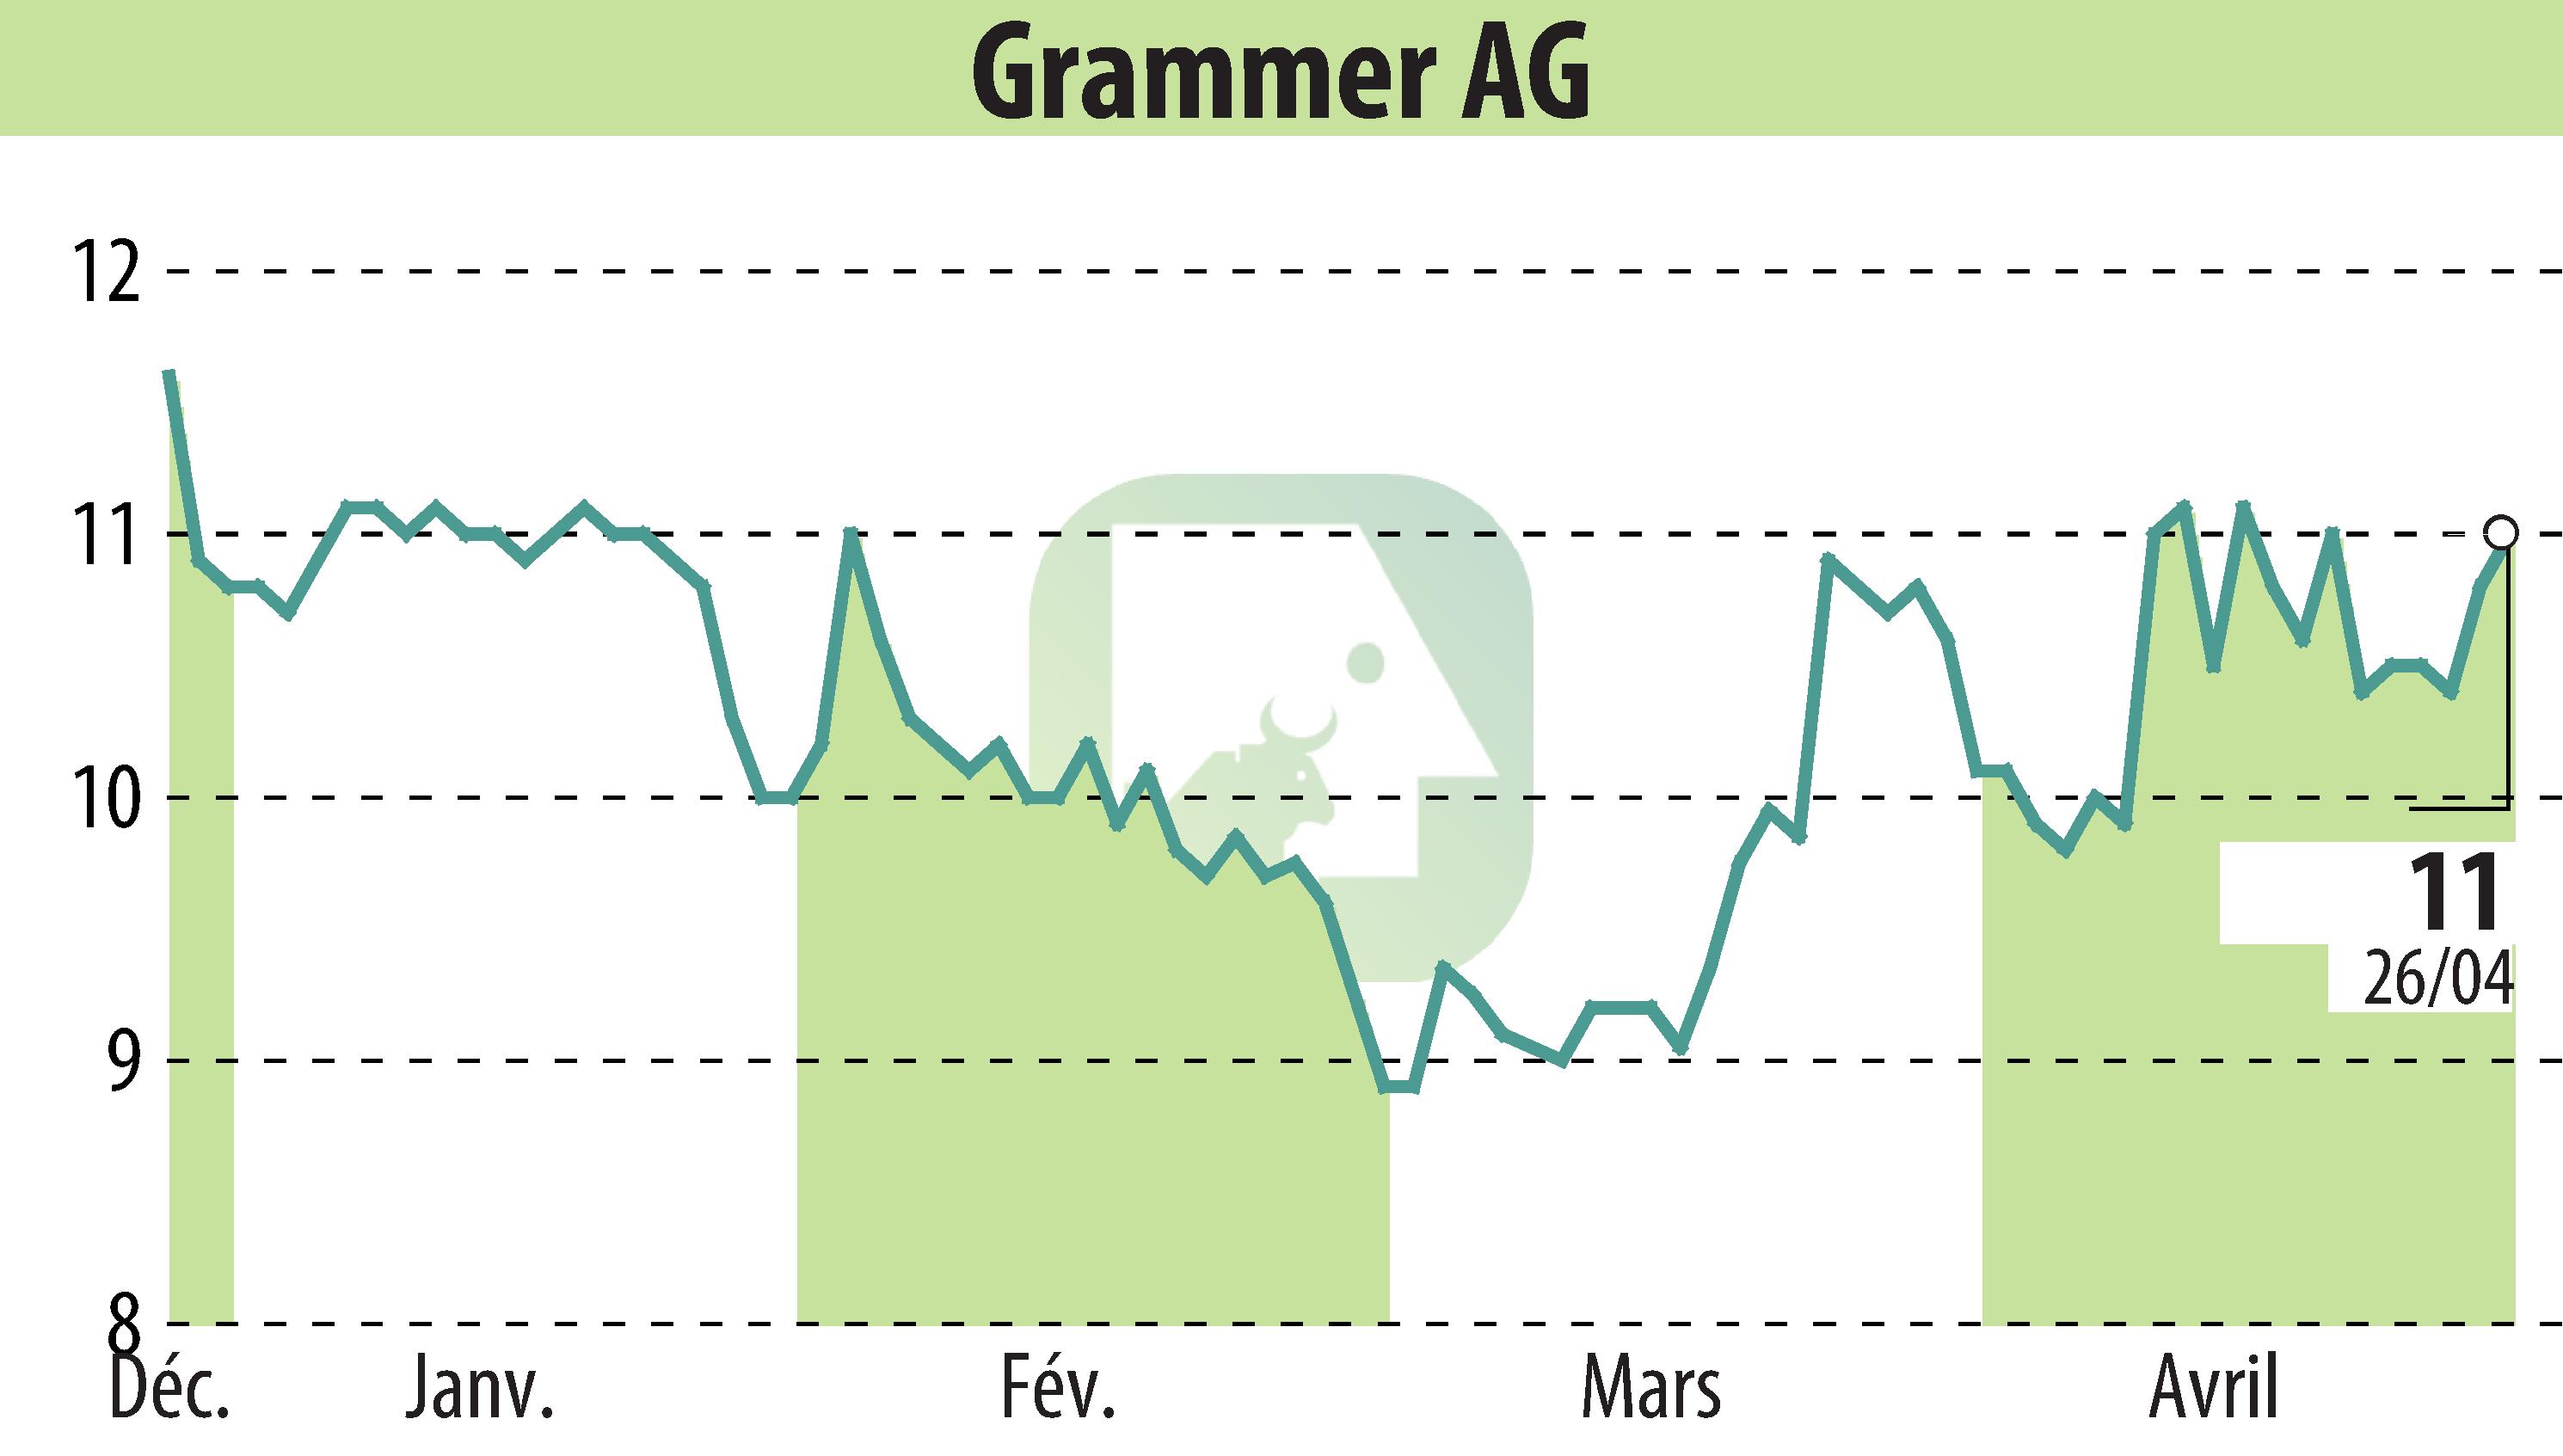 Stock price chart of Grammer AG (EBR:GMM) showing fluctuations.